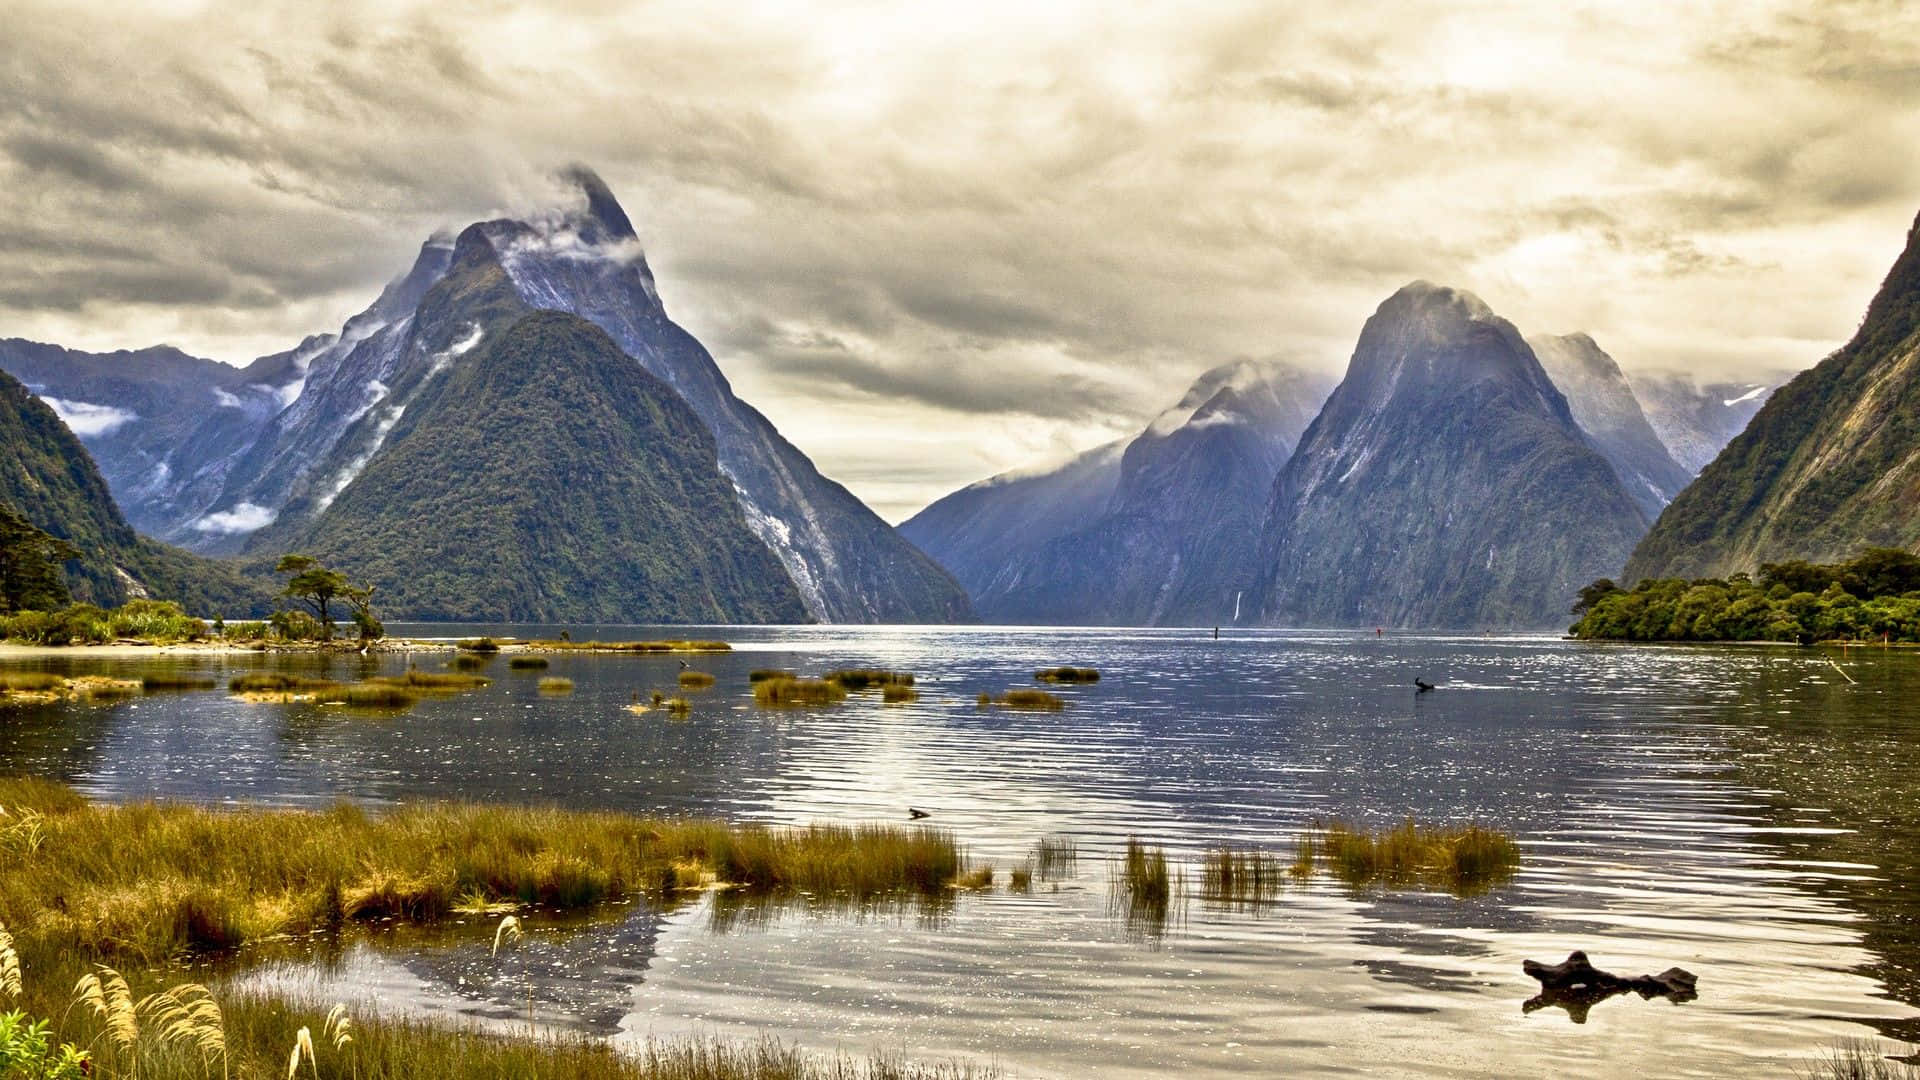 Enjoy the unique beauty of nature in New Zealand